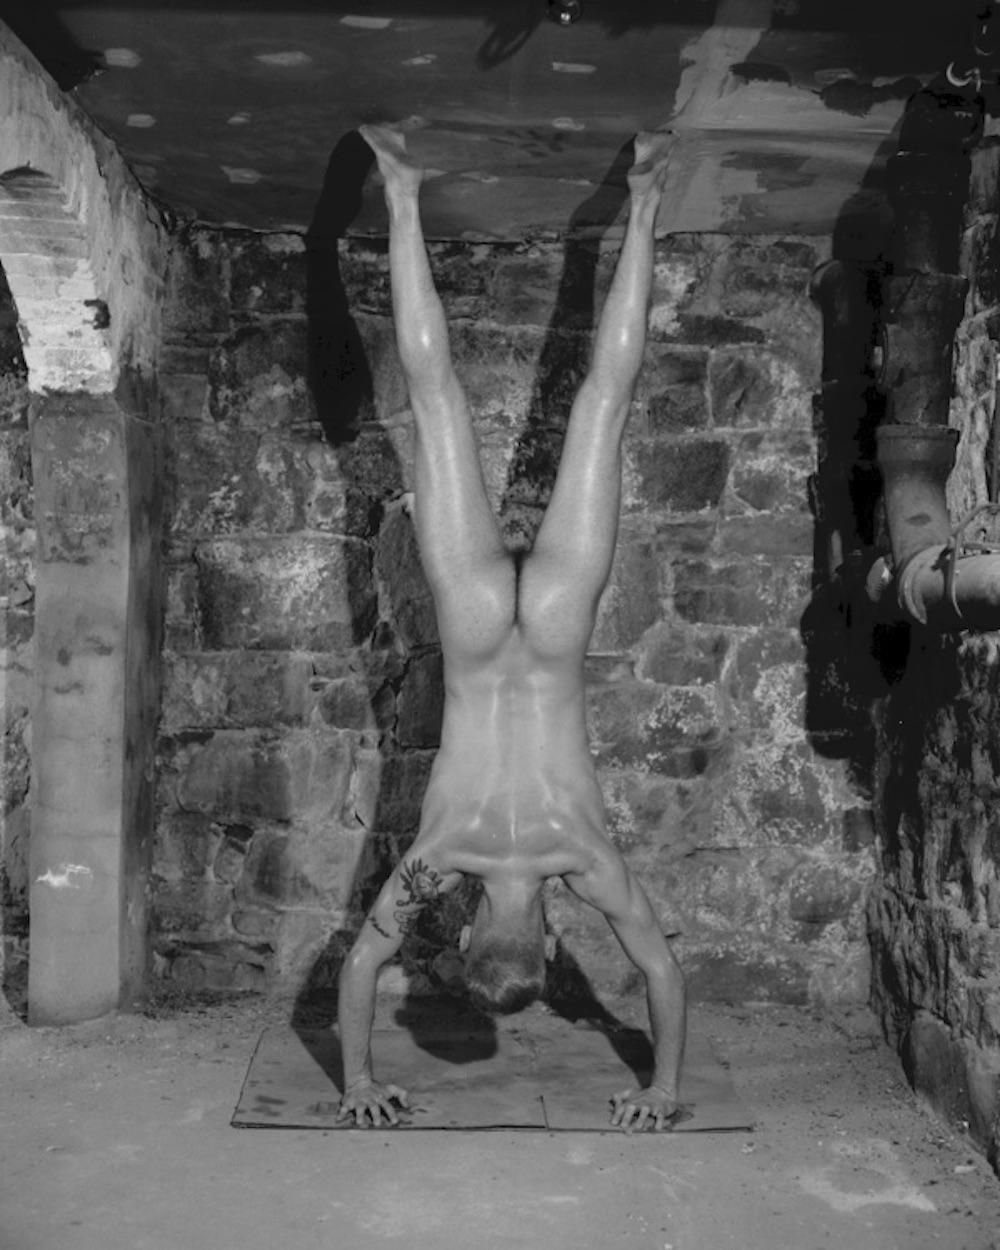 A nude male model posing in a handstand, from behind.